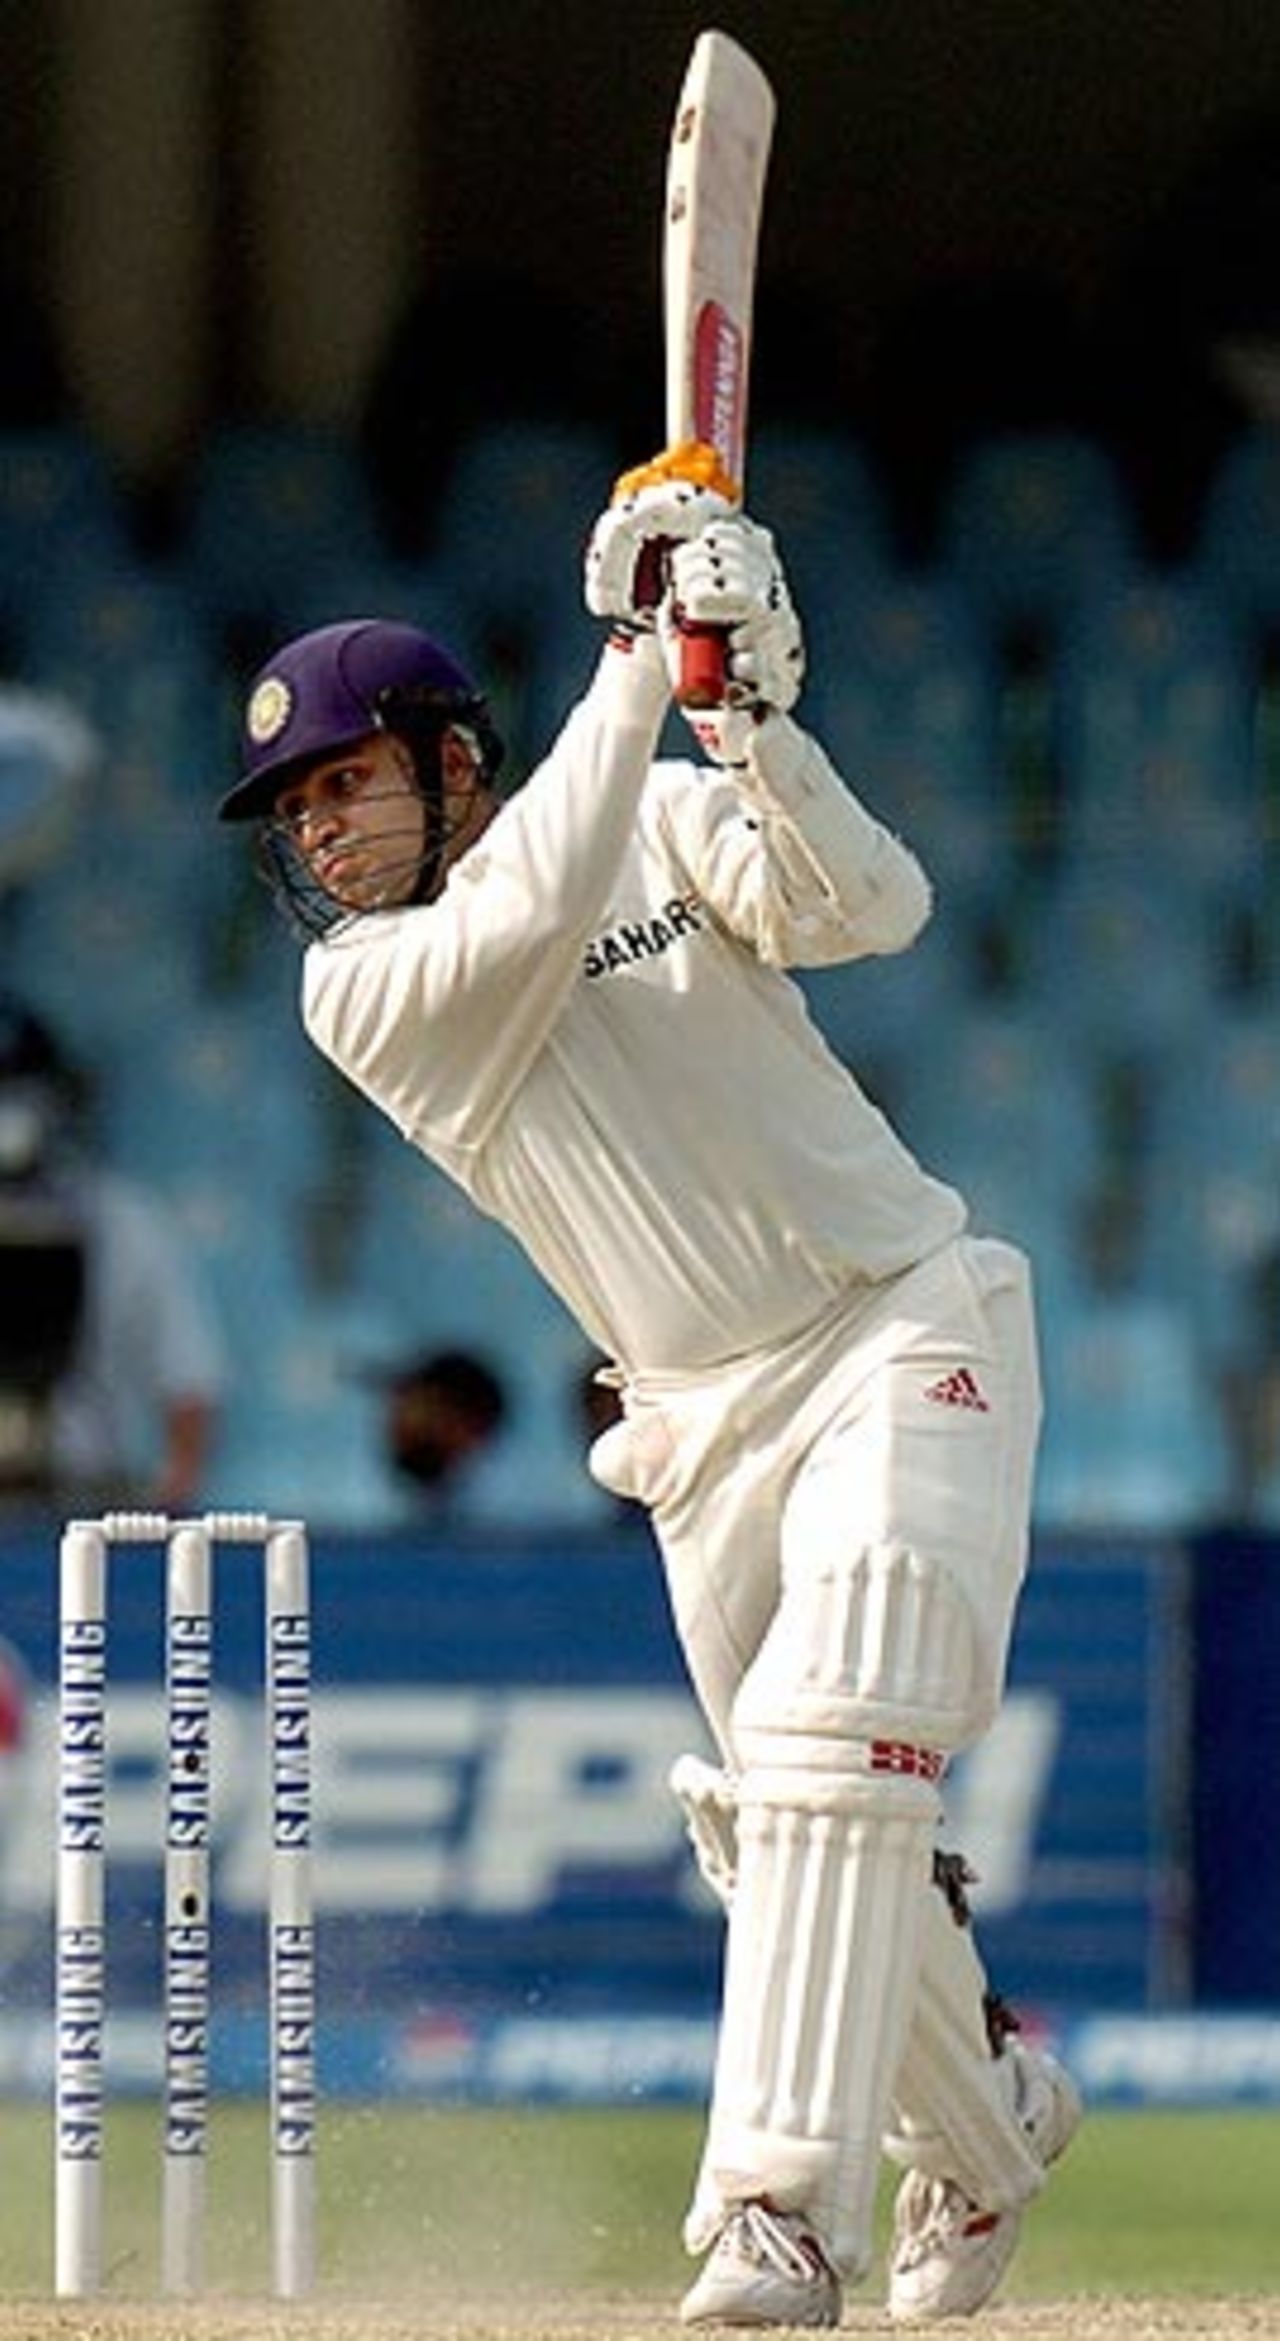 Virender Sehwag does his swashbuckling act while wickets tumble at the other end, Pakistan v India, 2nd Test, Lahore, 3rd day, April 7, 2004